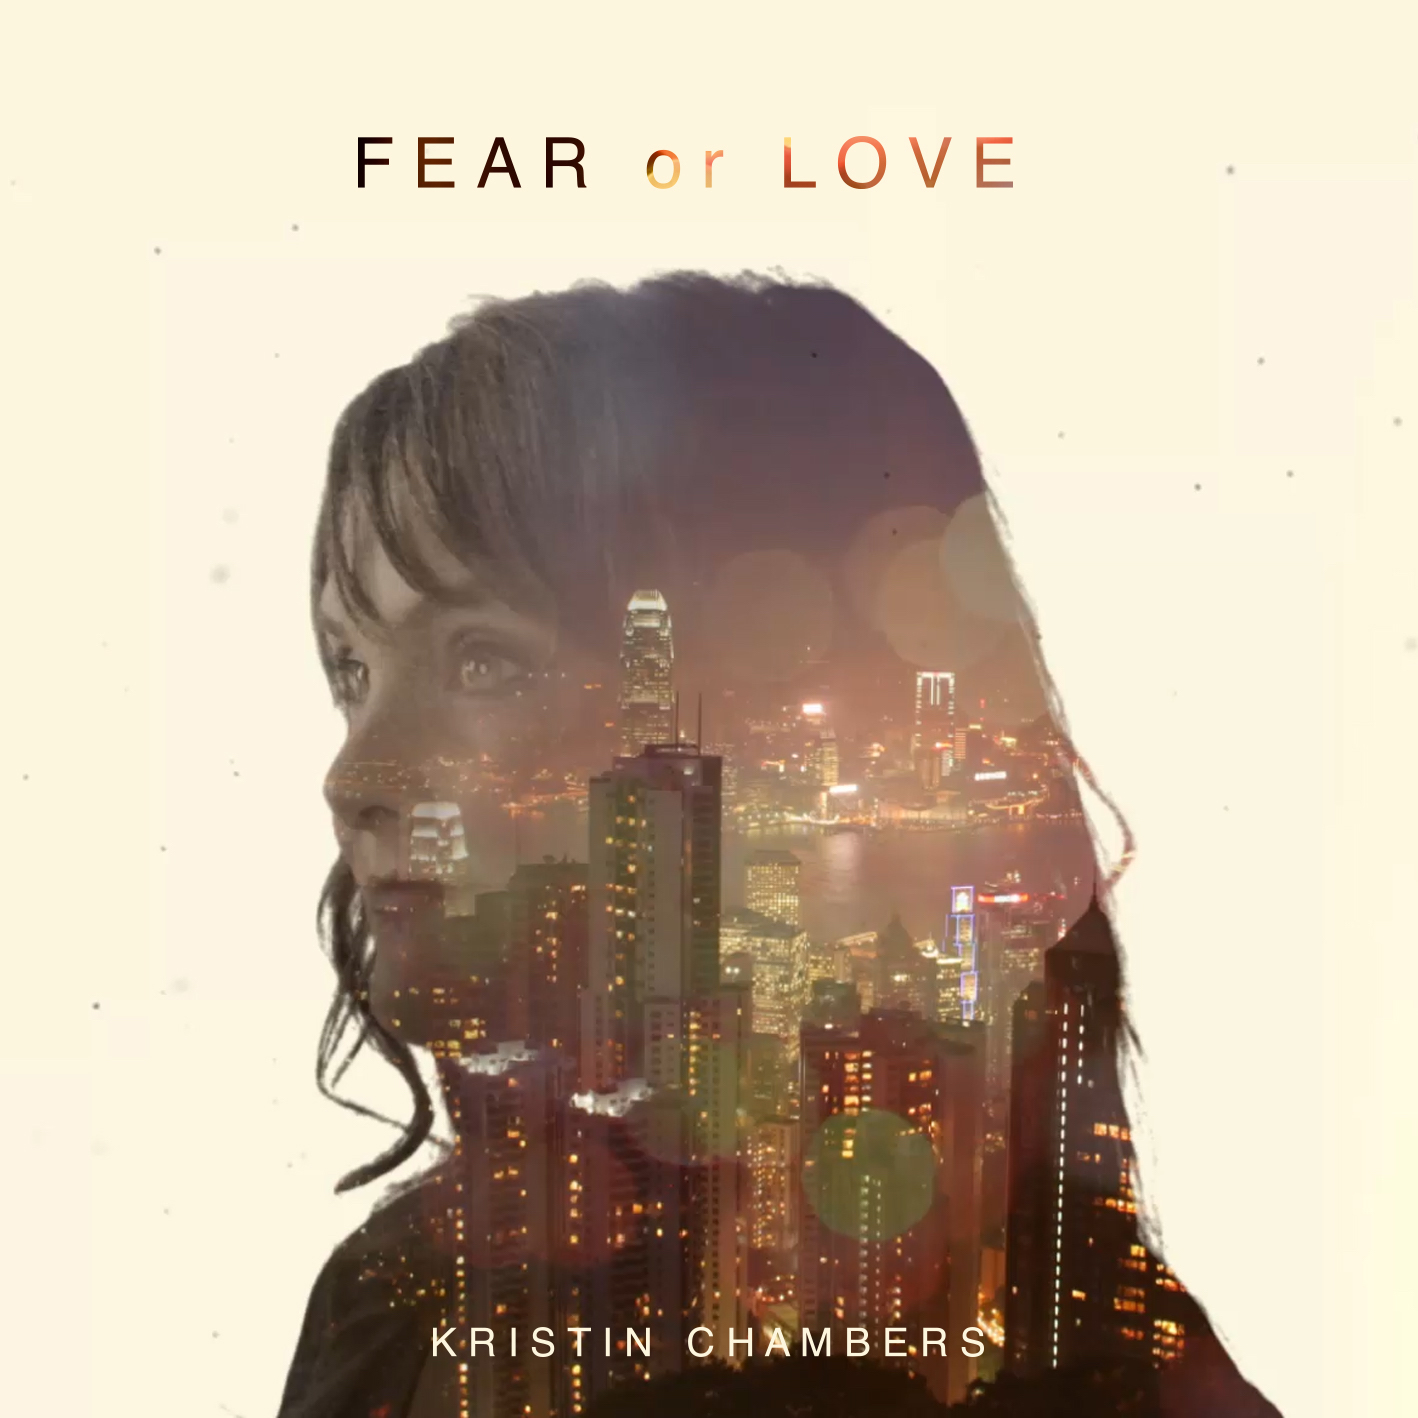  Kristin Chambers – “Fear Or Love” Release Party Oct. 21st!